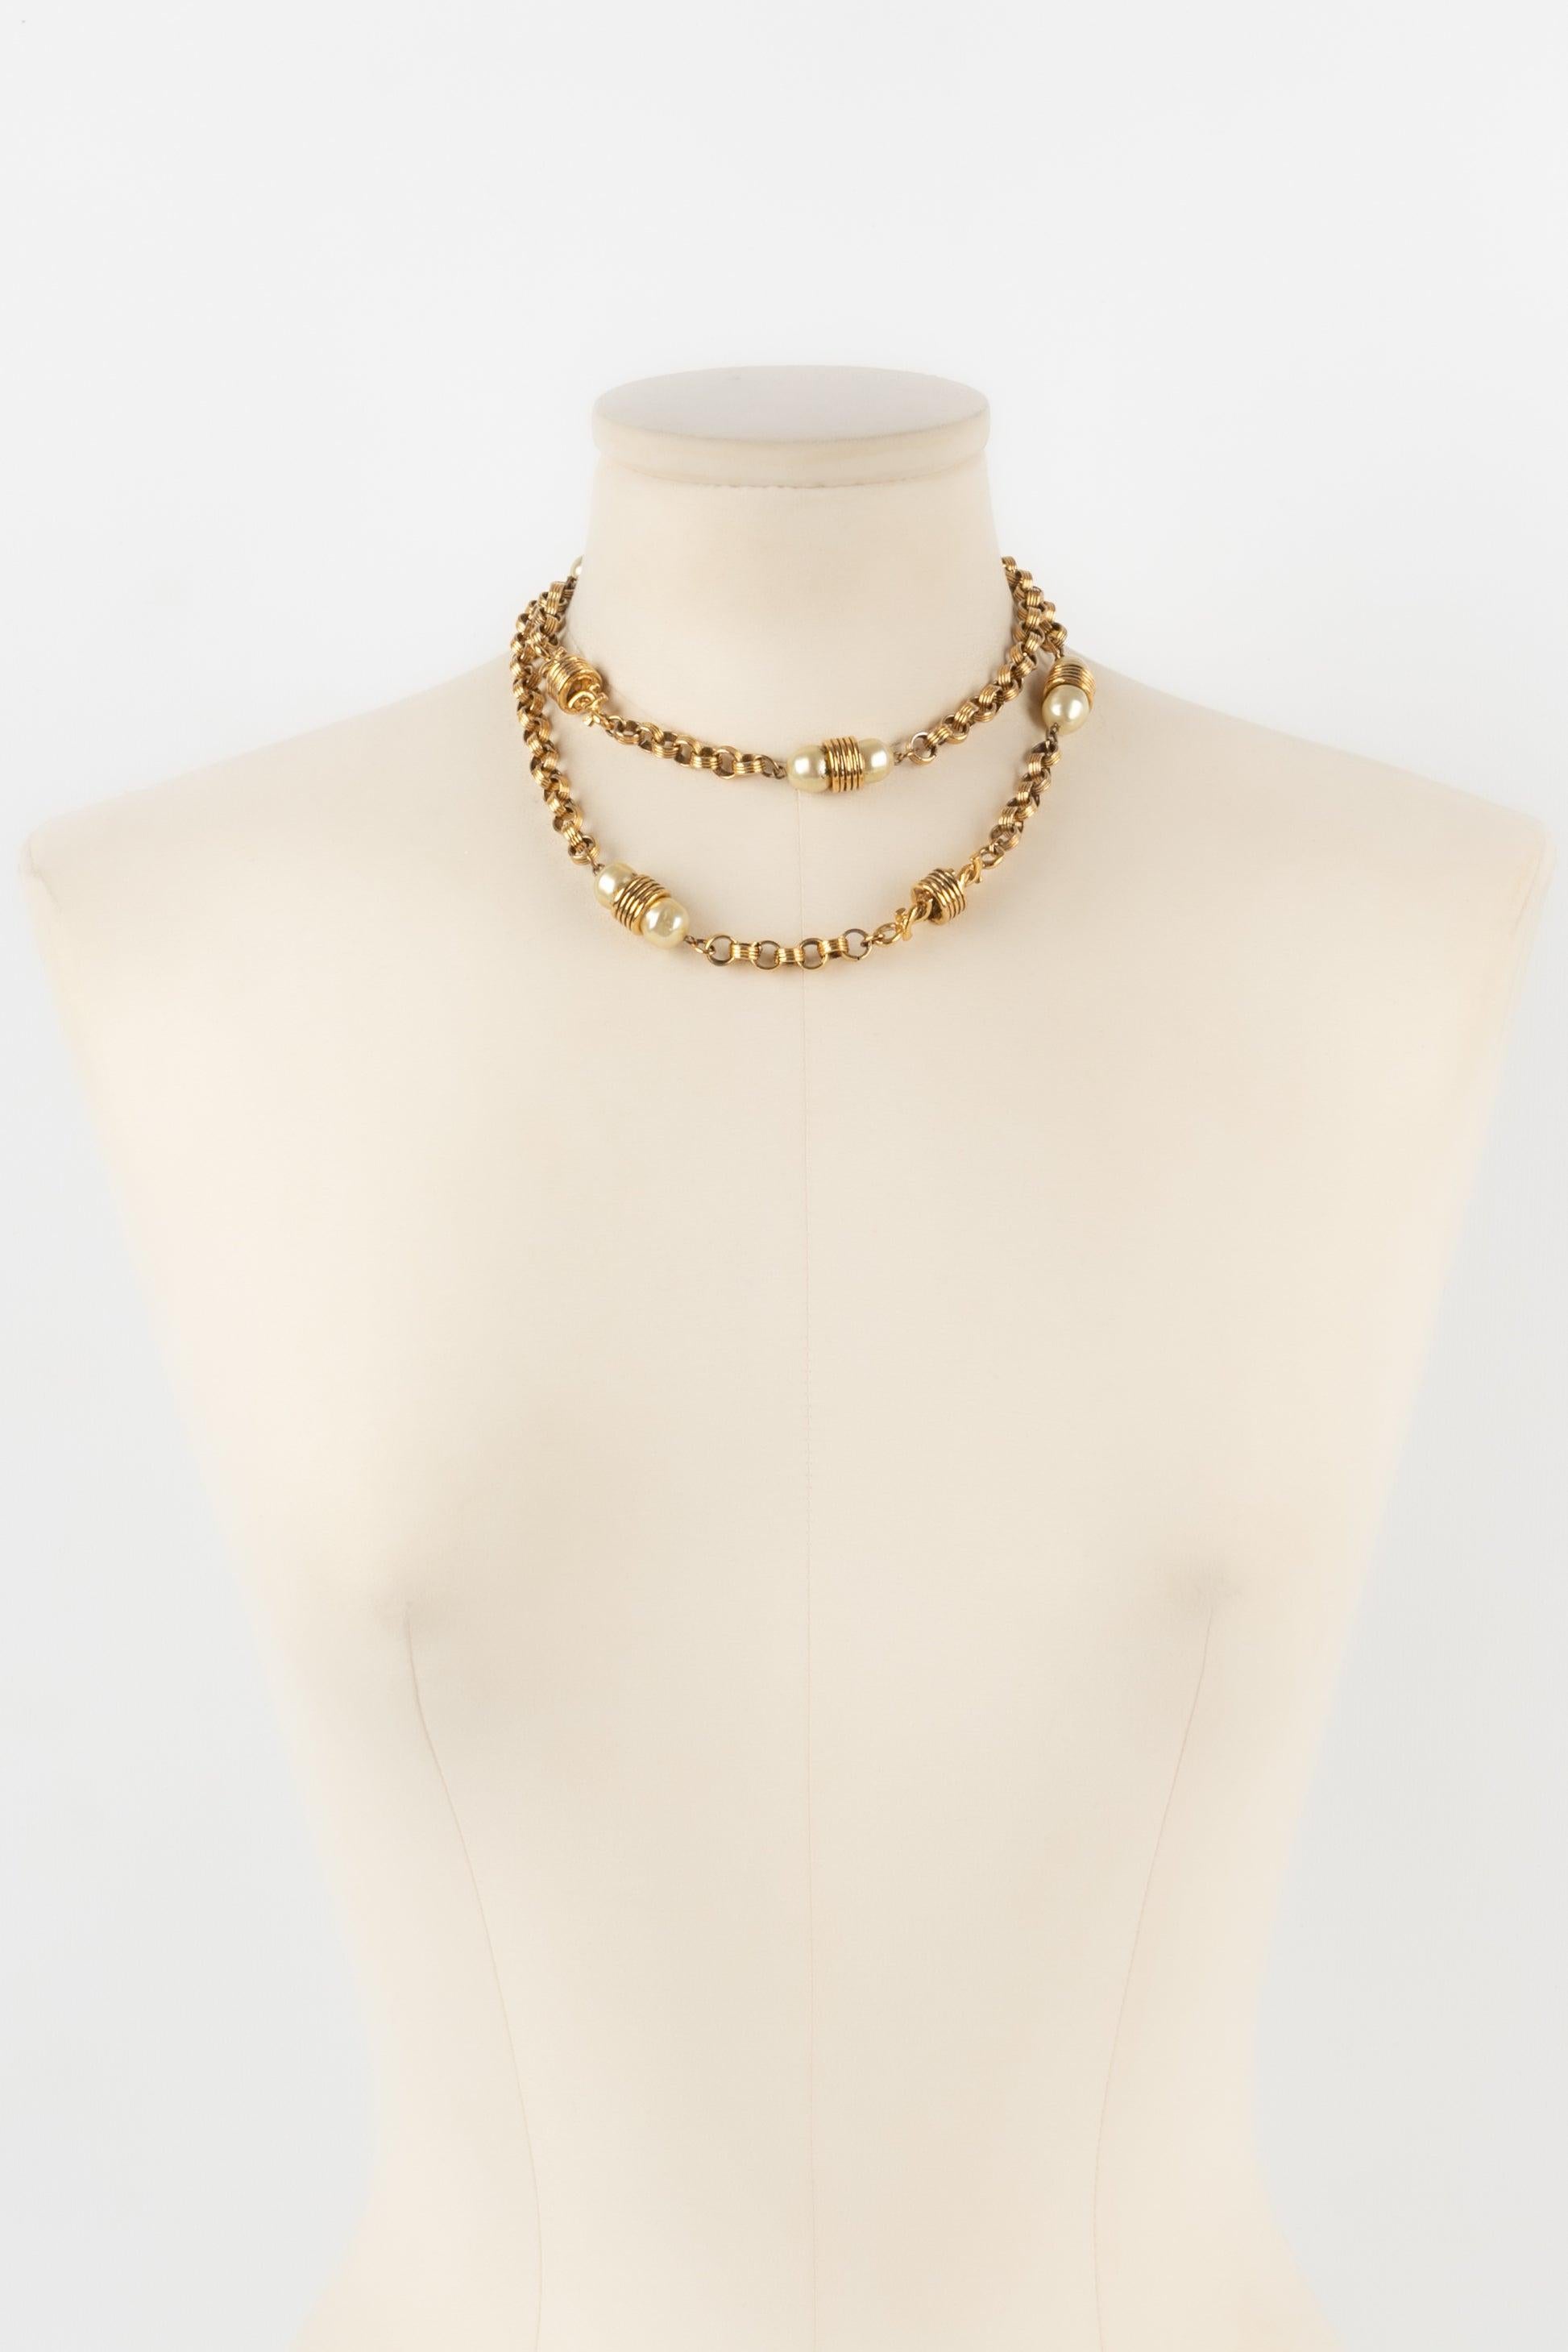 Chanel Golden Metal Necklace with Costume Pearls, 1980s For Sale 4